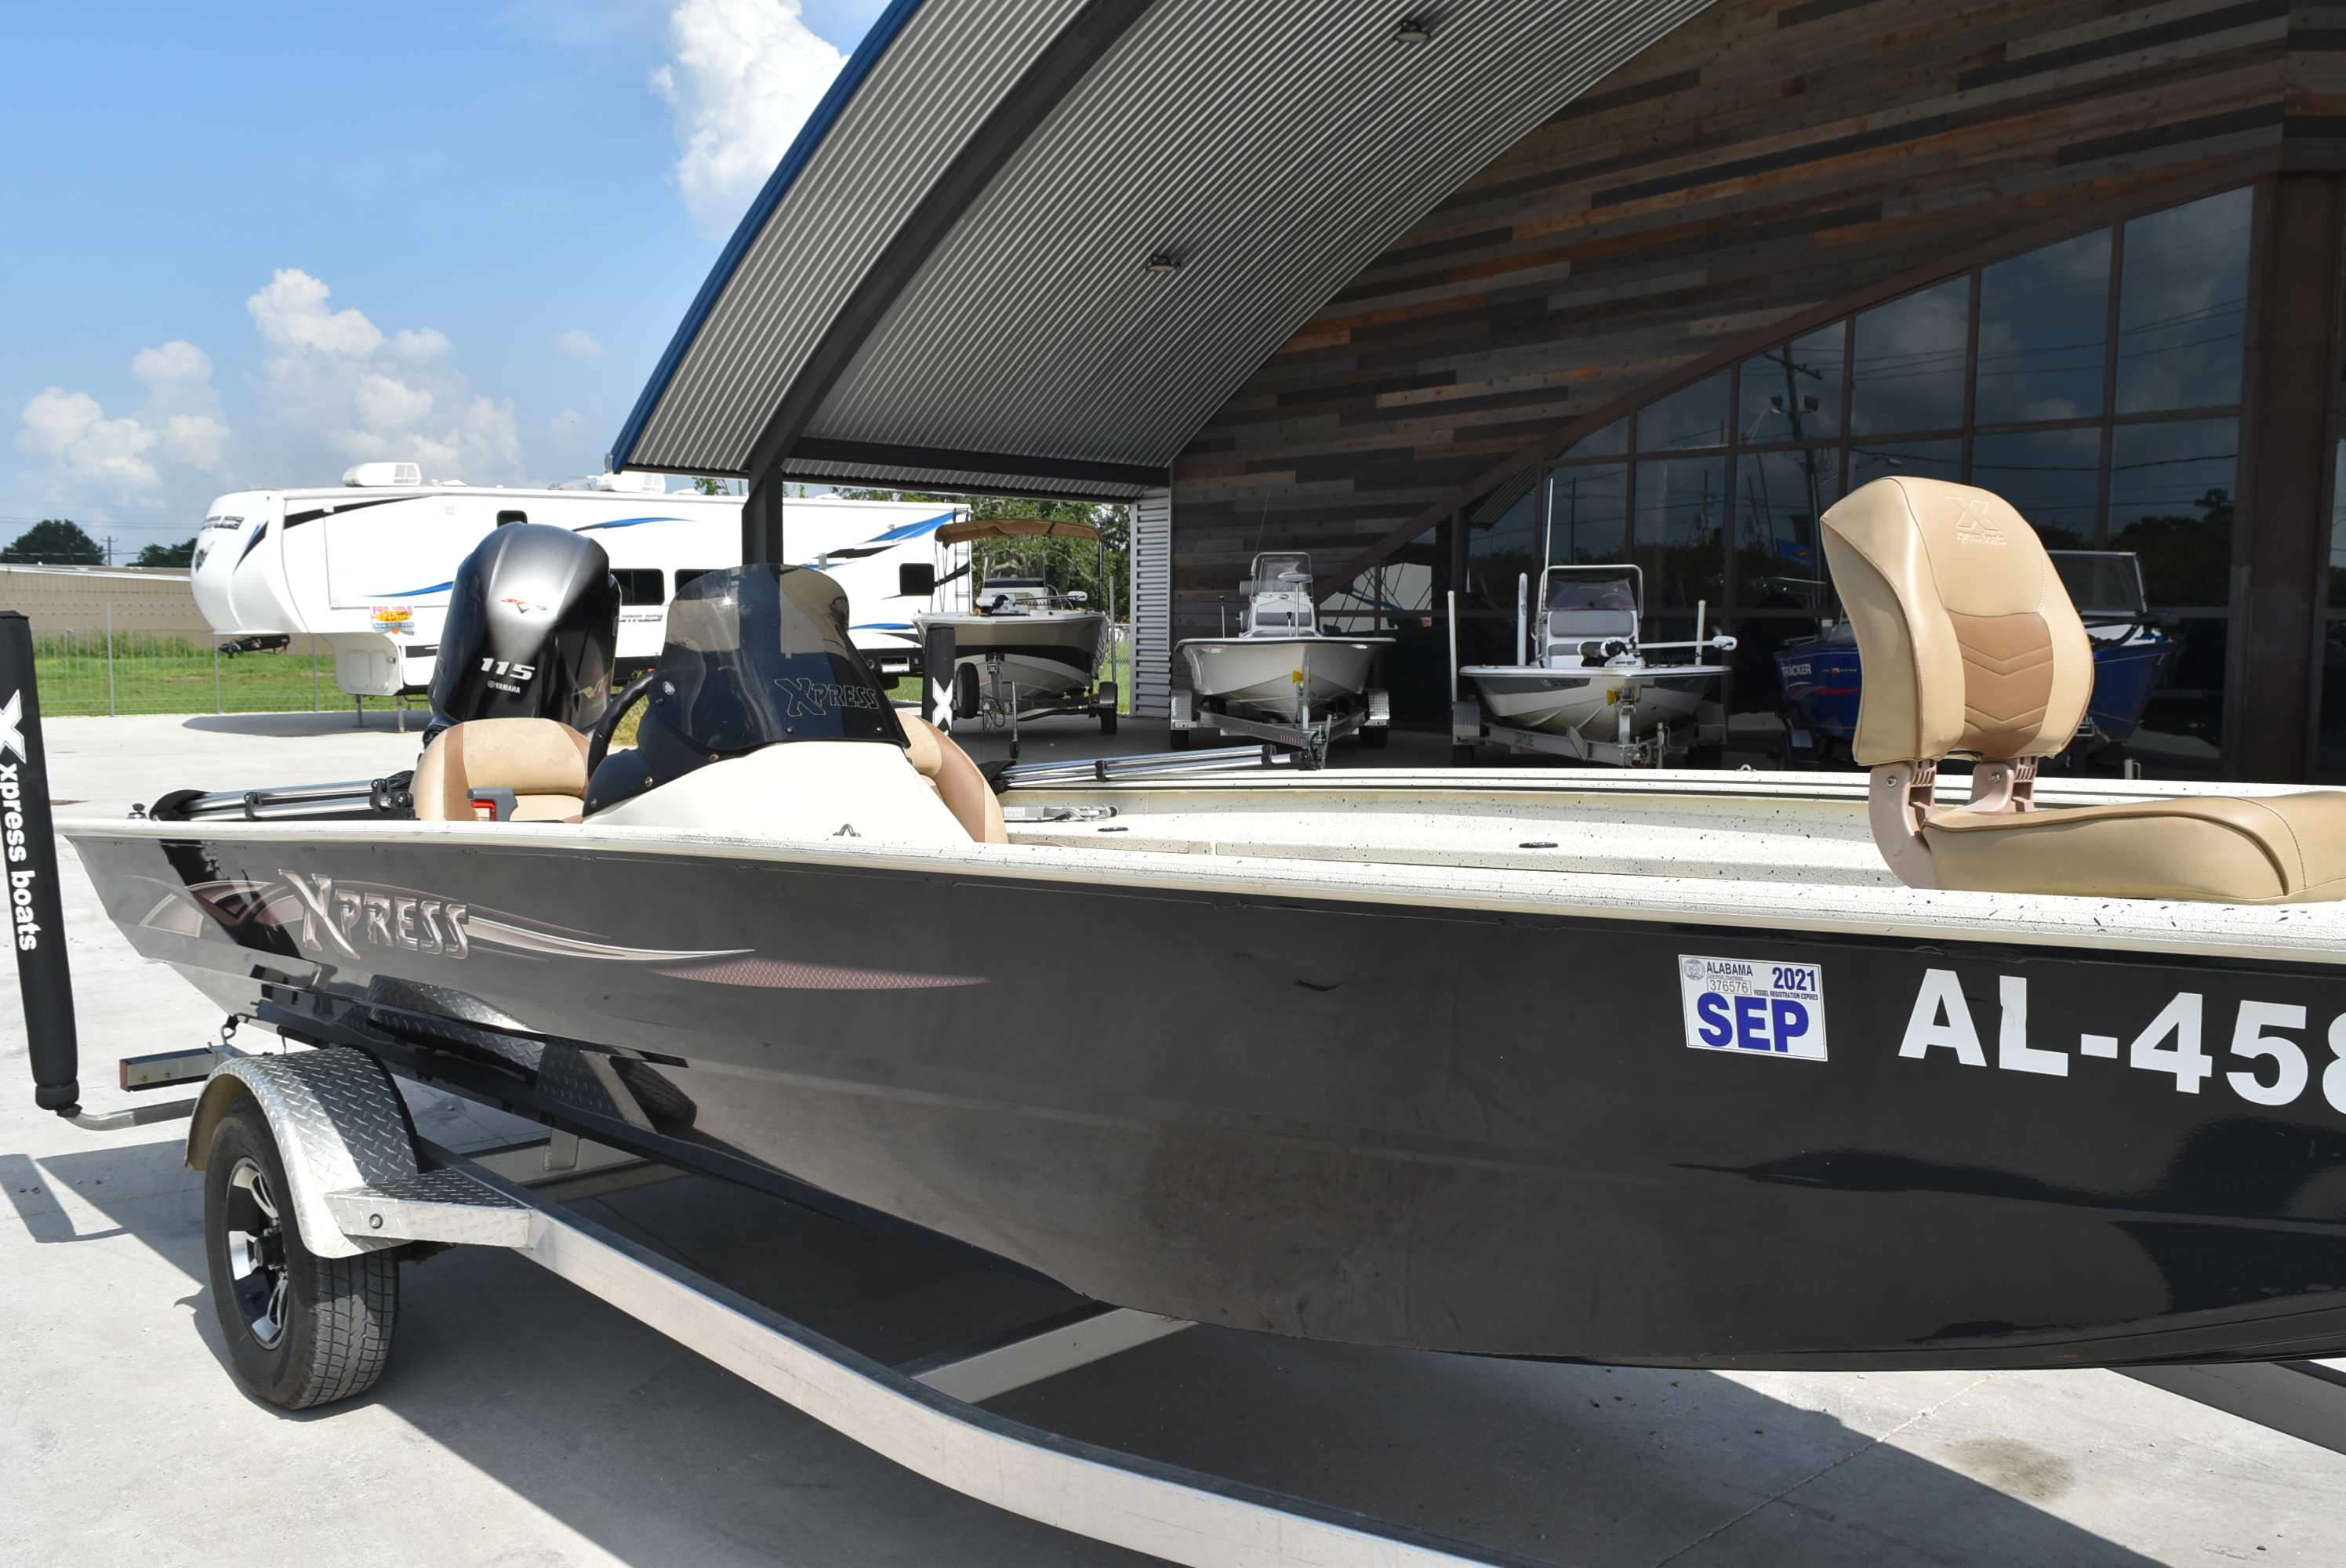 2020 Xpress boat for sale, model of the boat is 200Xp & Image # 6 of 8